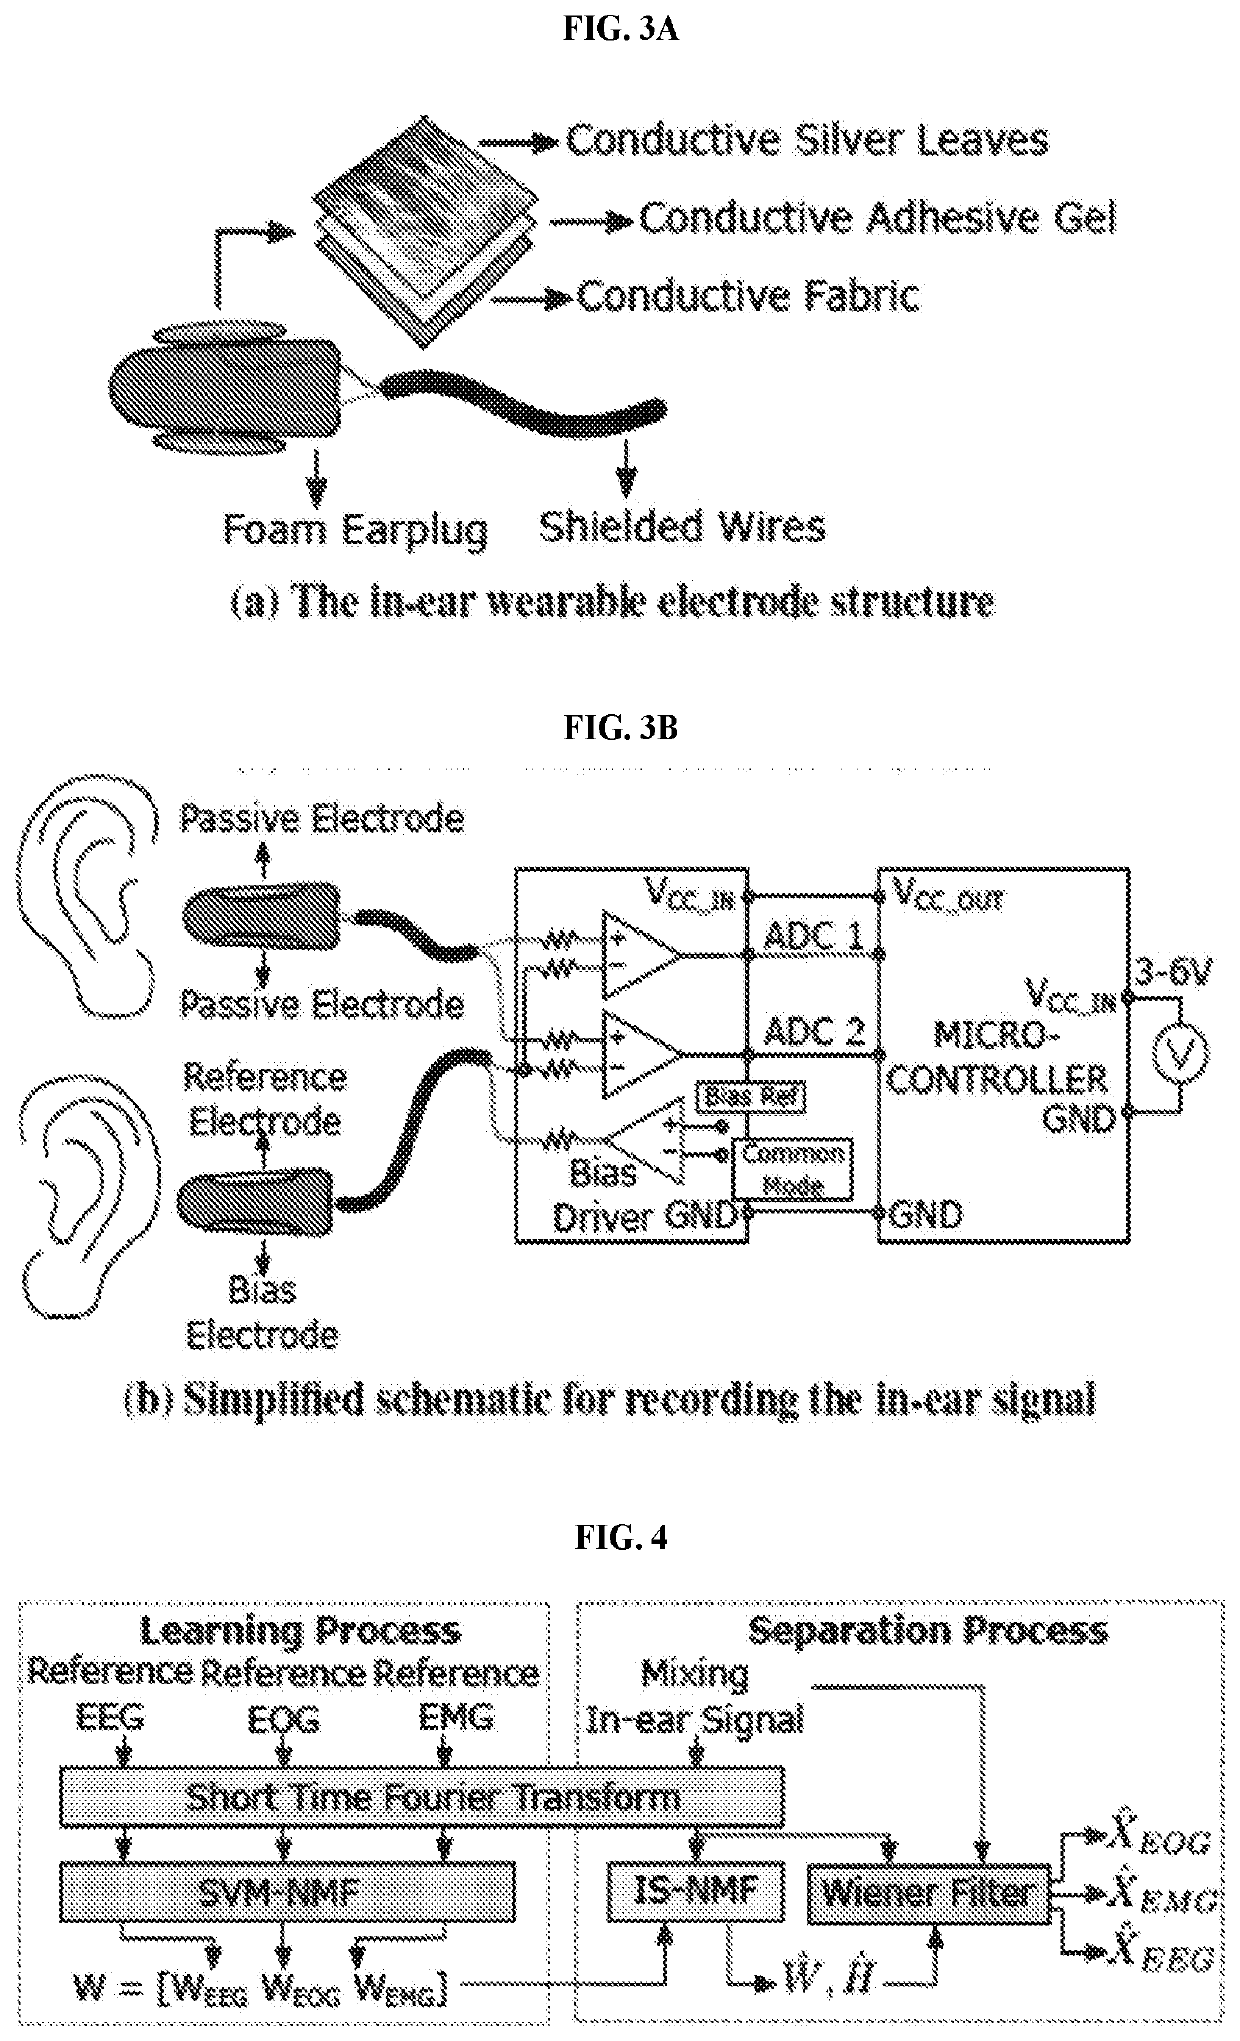 In-ear sensing systems and methods for biological signal monitoring